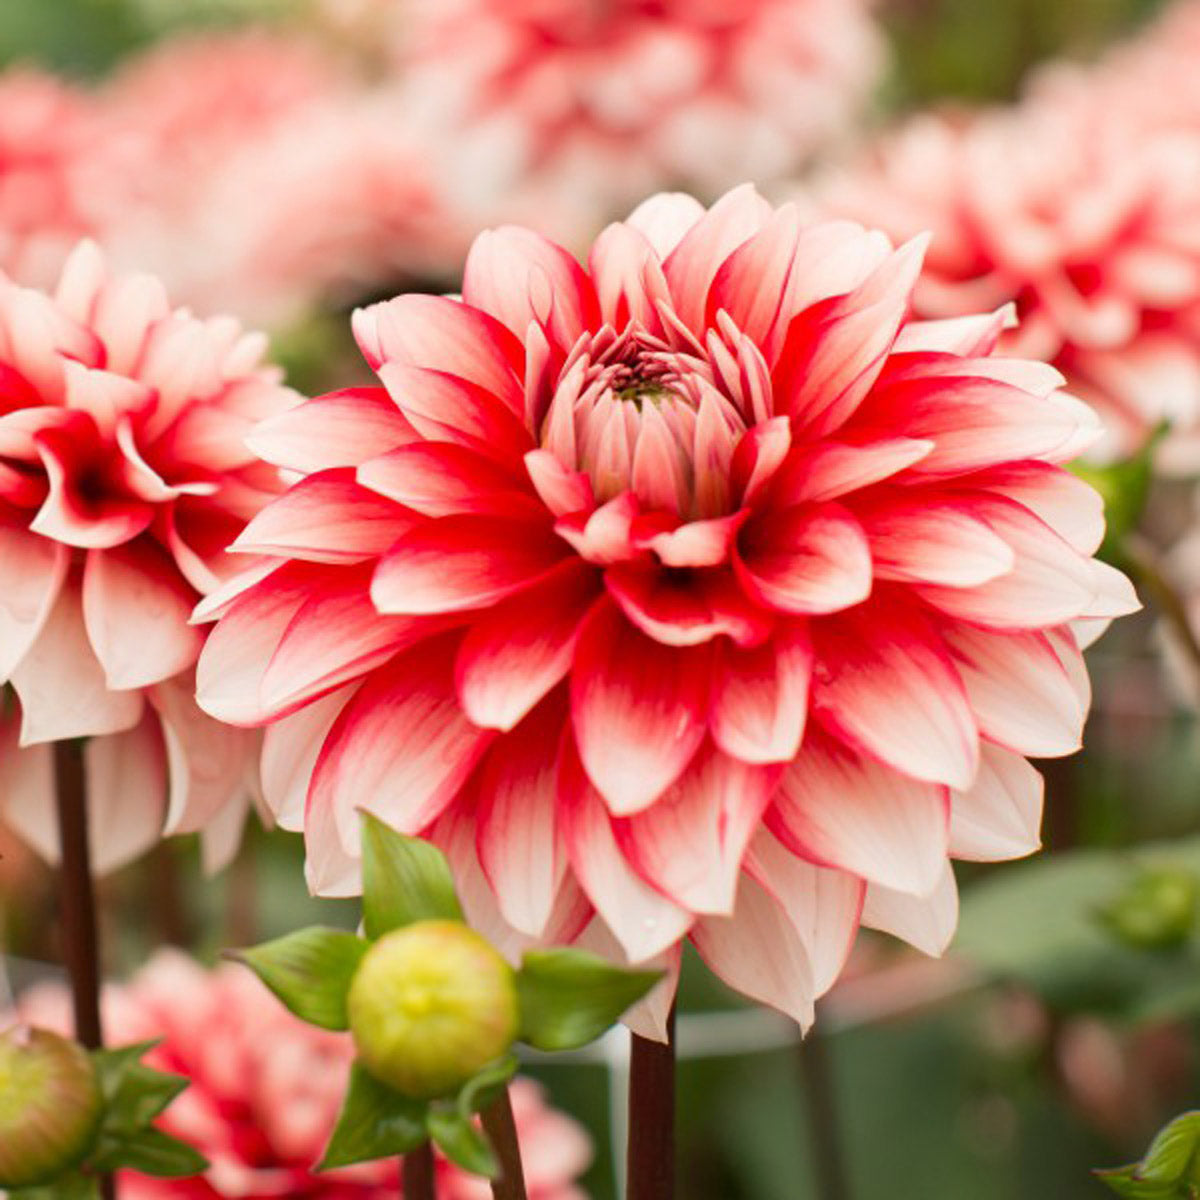 The Dahlia… the most vibrant vivid and vigorous plant in the garden